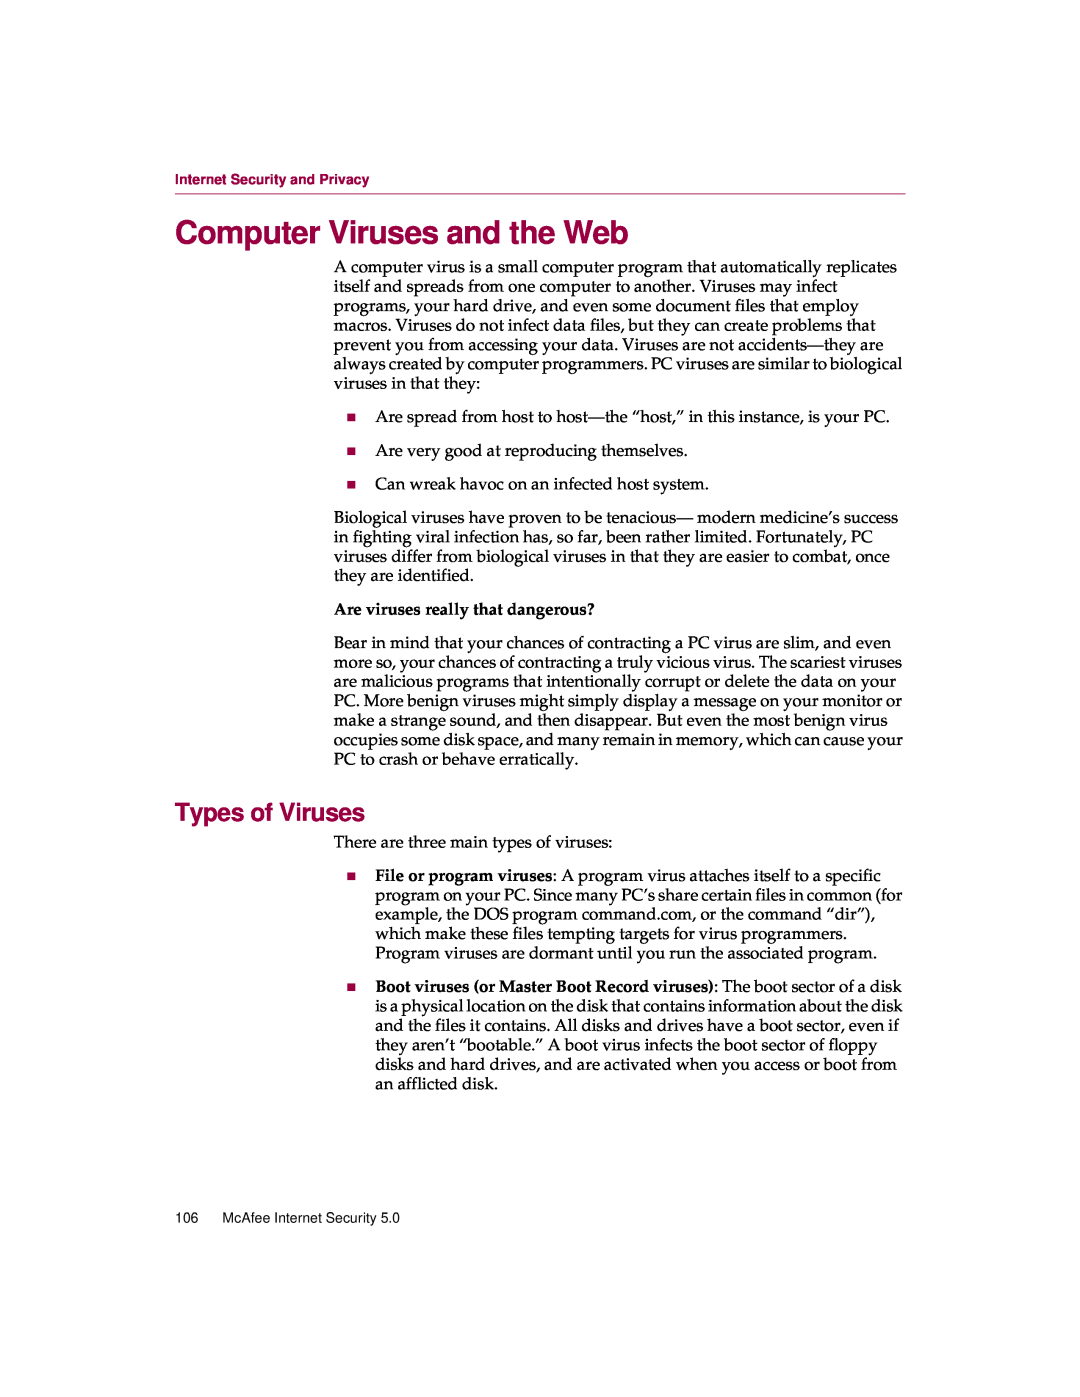 McAfee 5 manual Computer Viruses and the Web, Types of Viruses, Are viruses really that dangerous? 